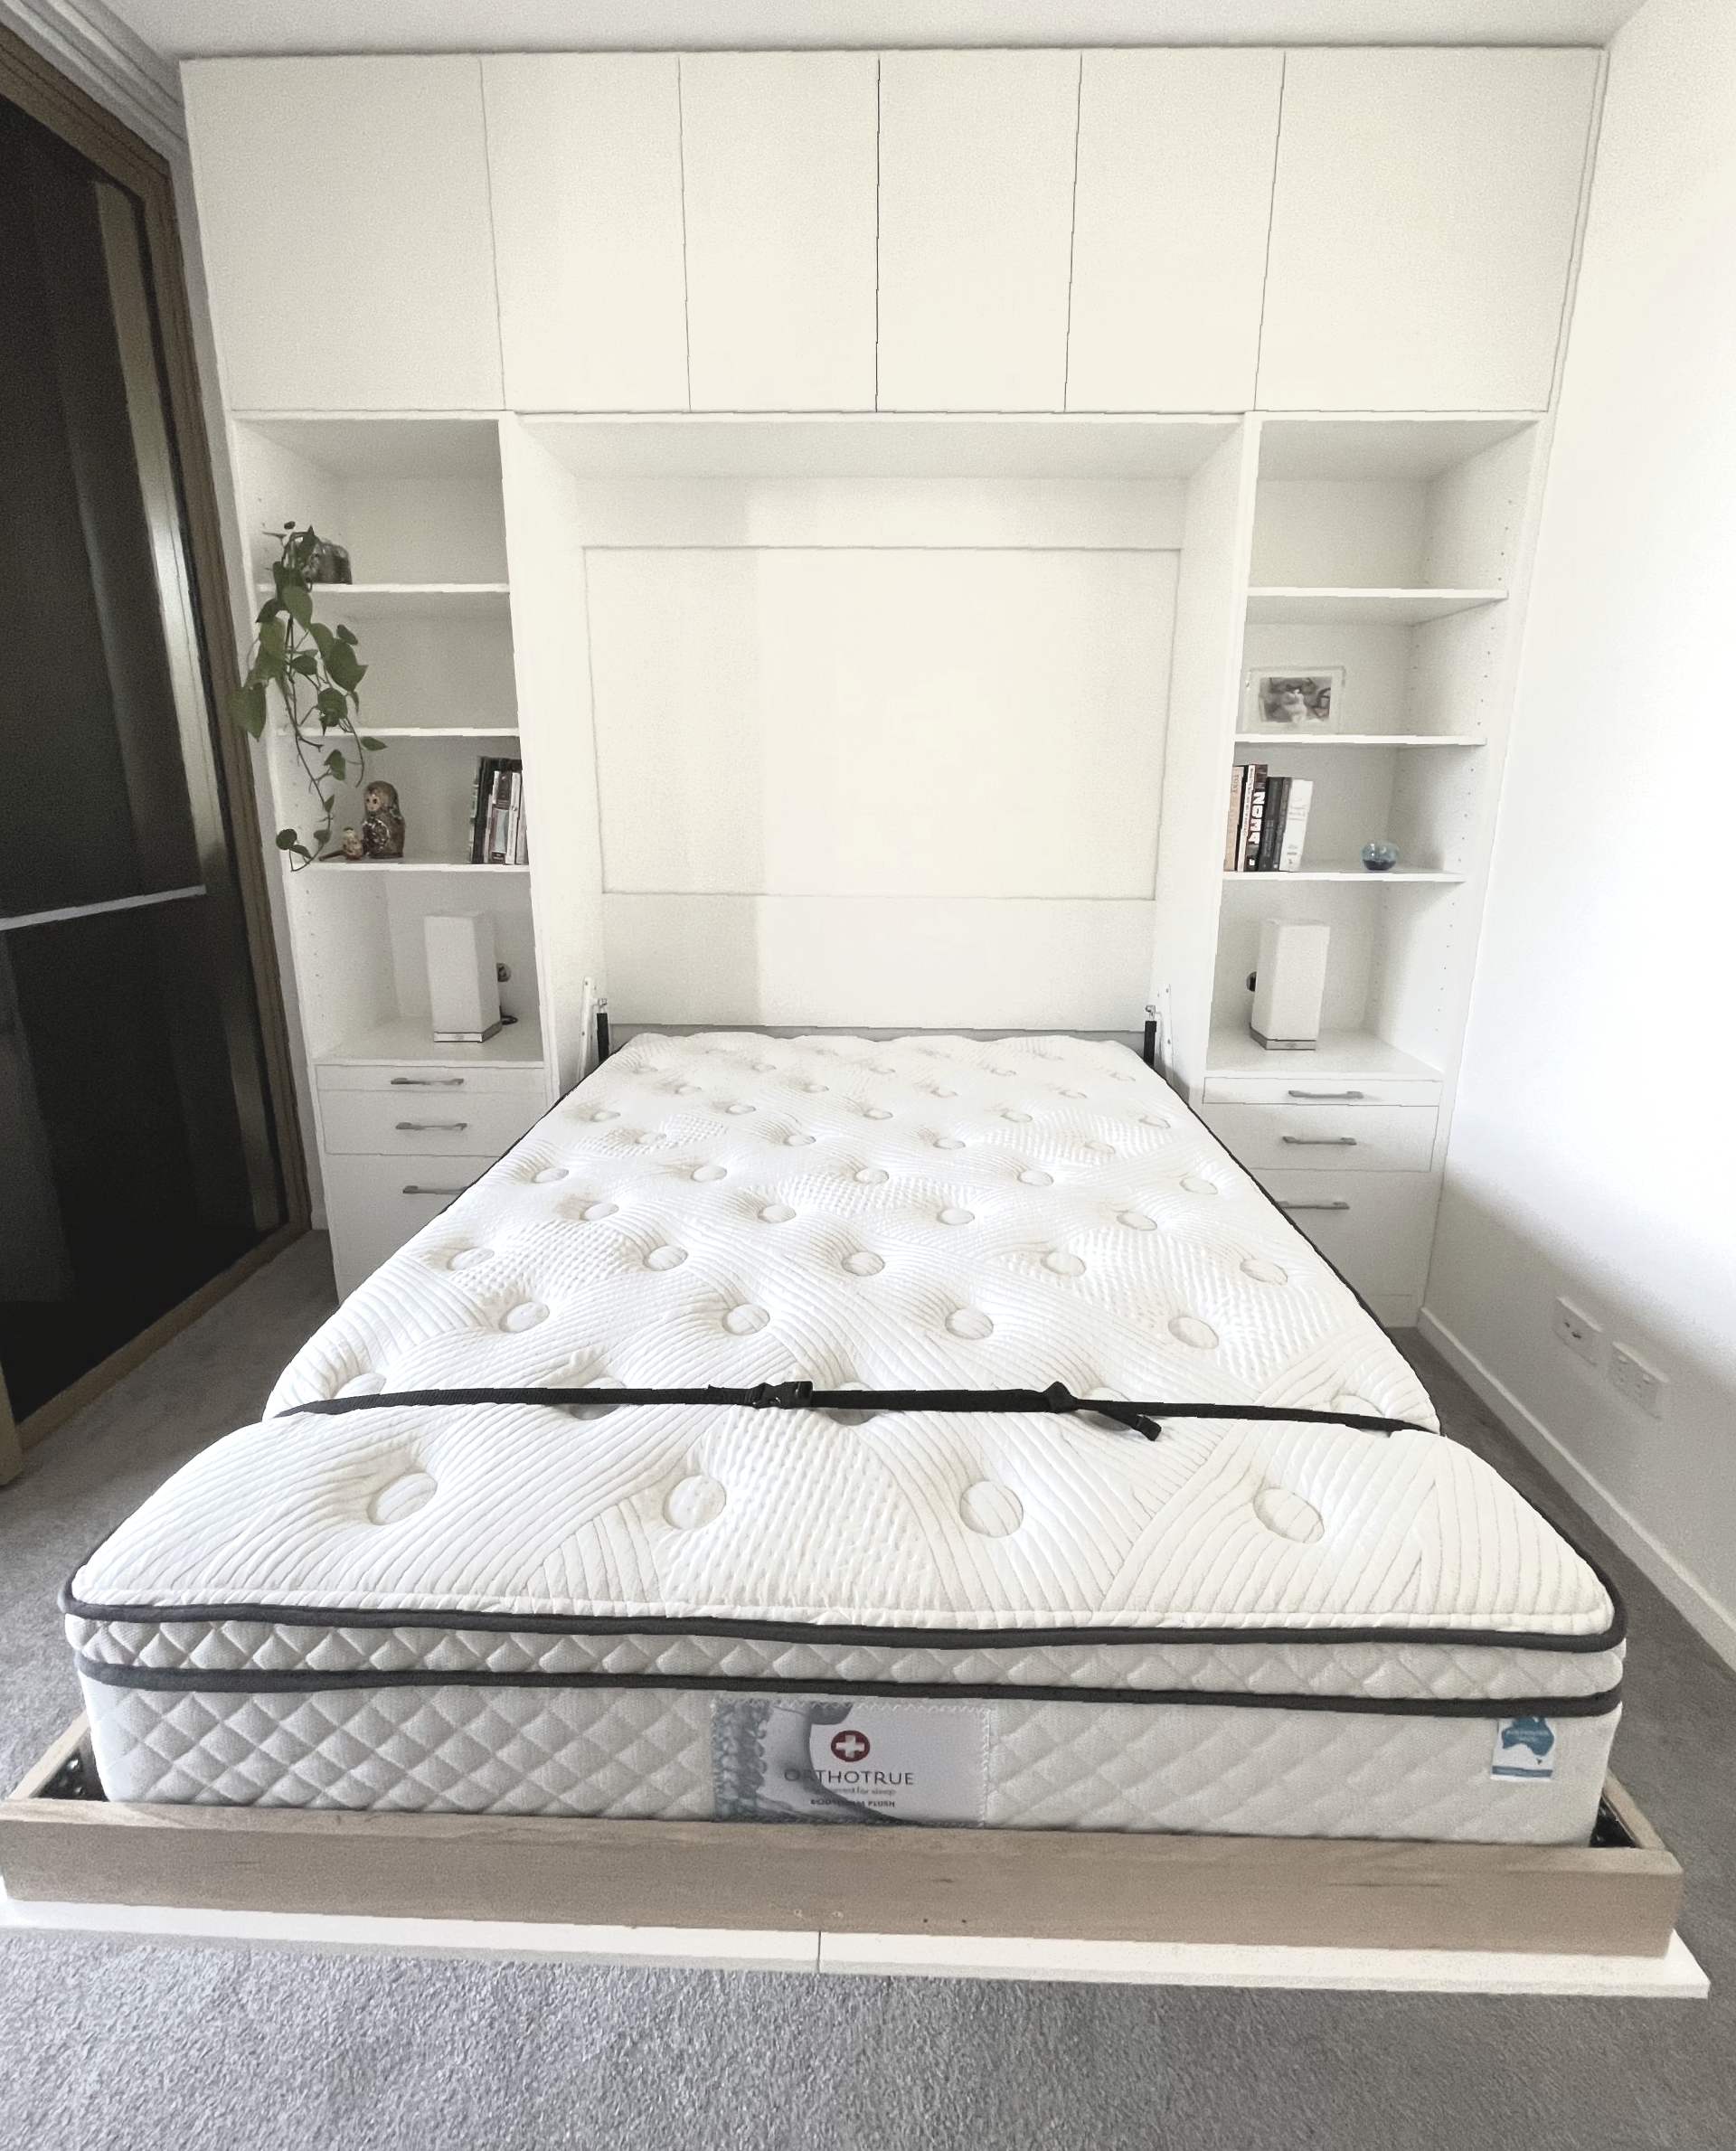 BSD Queen bed, full storage, shadow line to ceiling, open